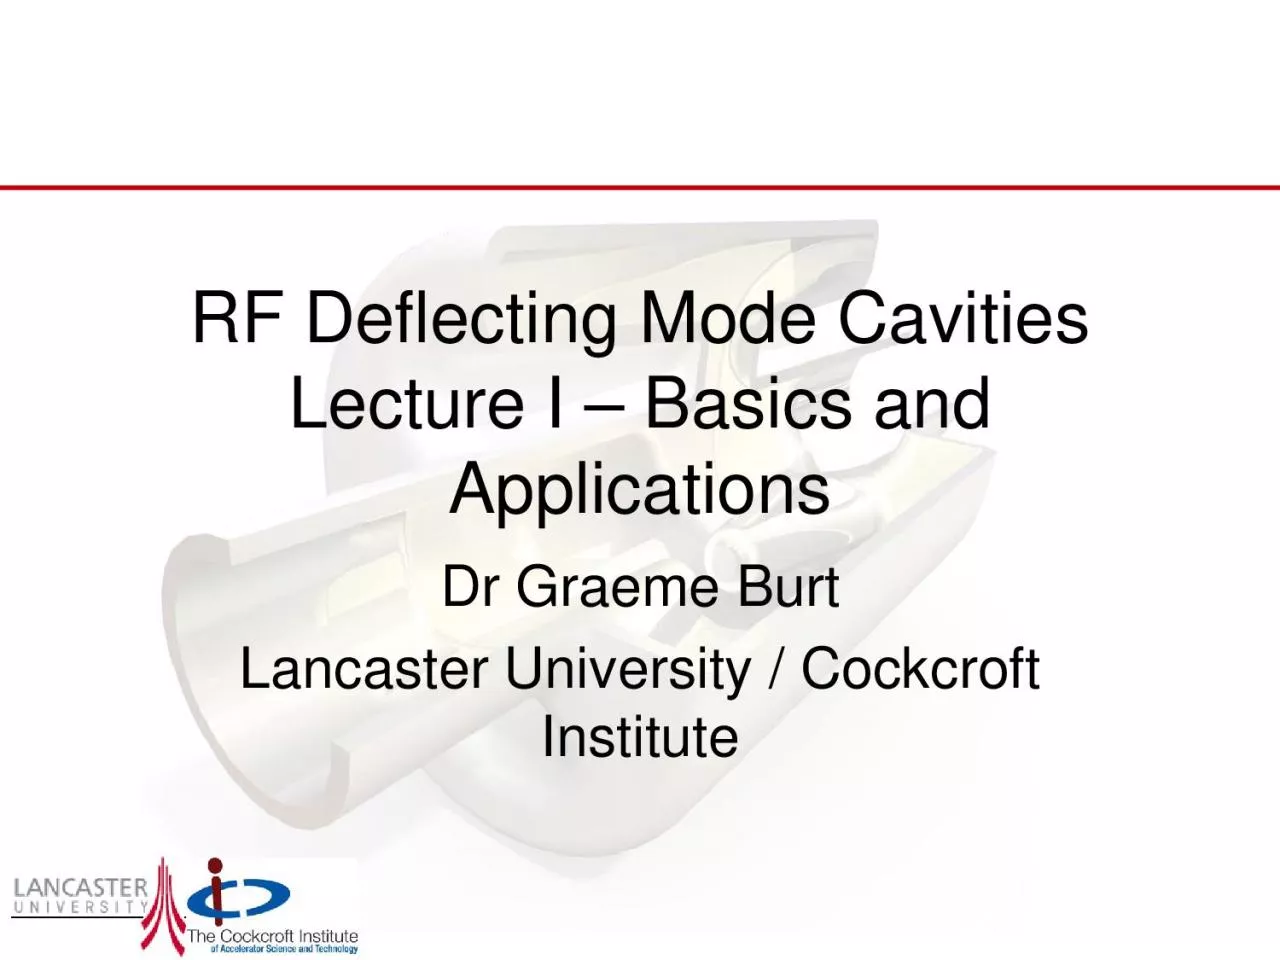 RF Deflecting Mode CavitiesLecture I Basics and ApplicationsDr Graeme